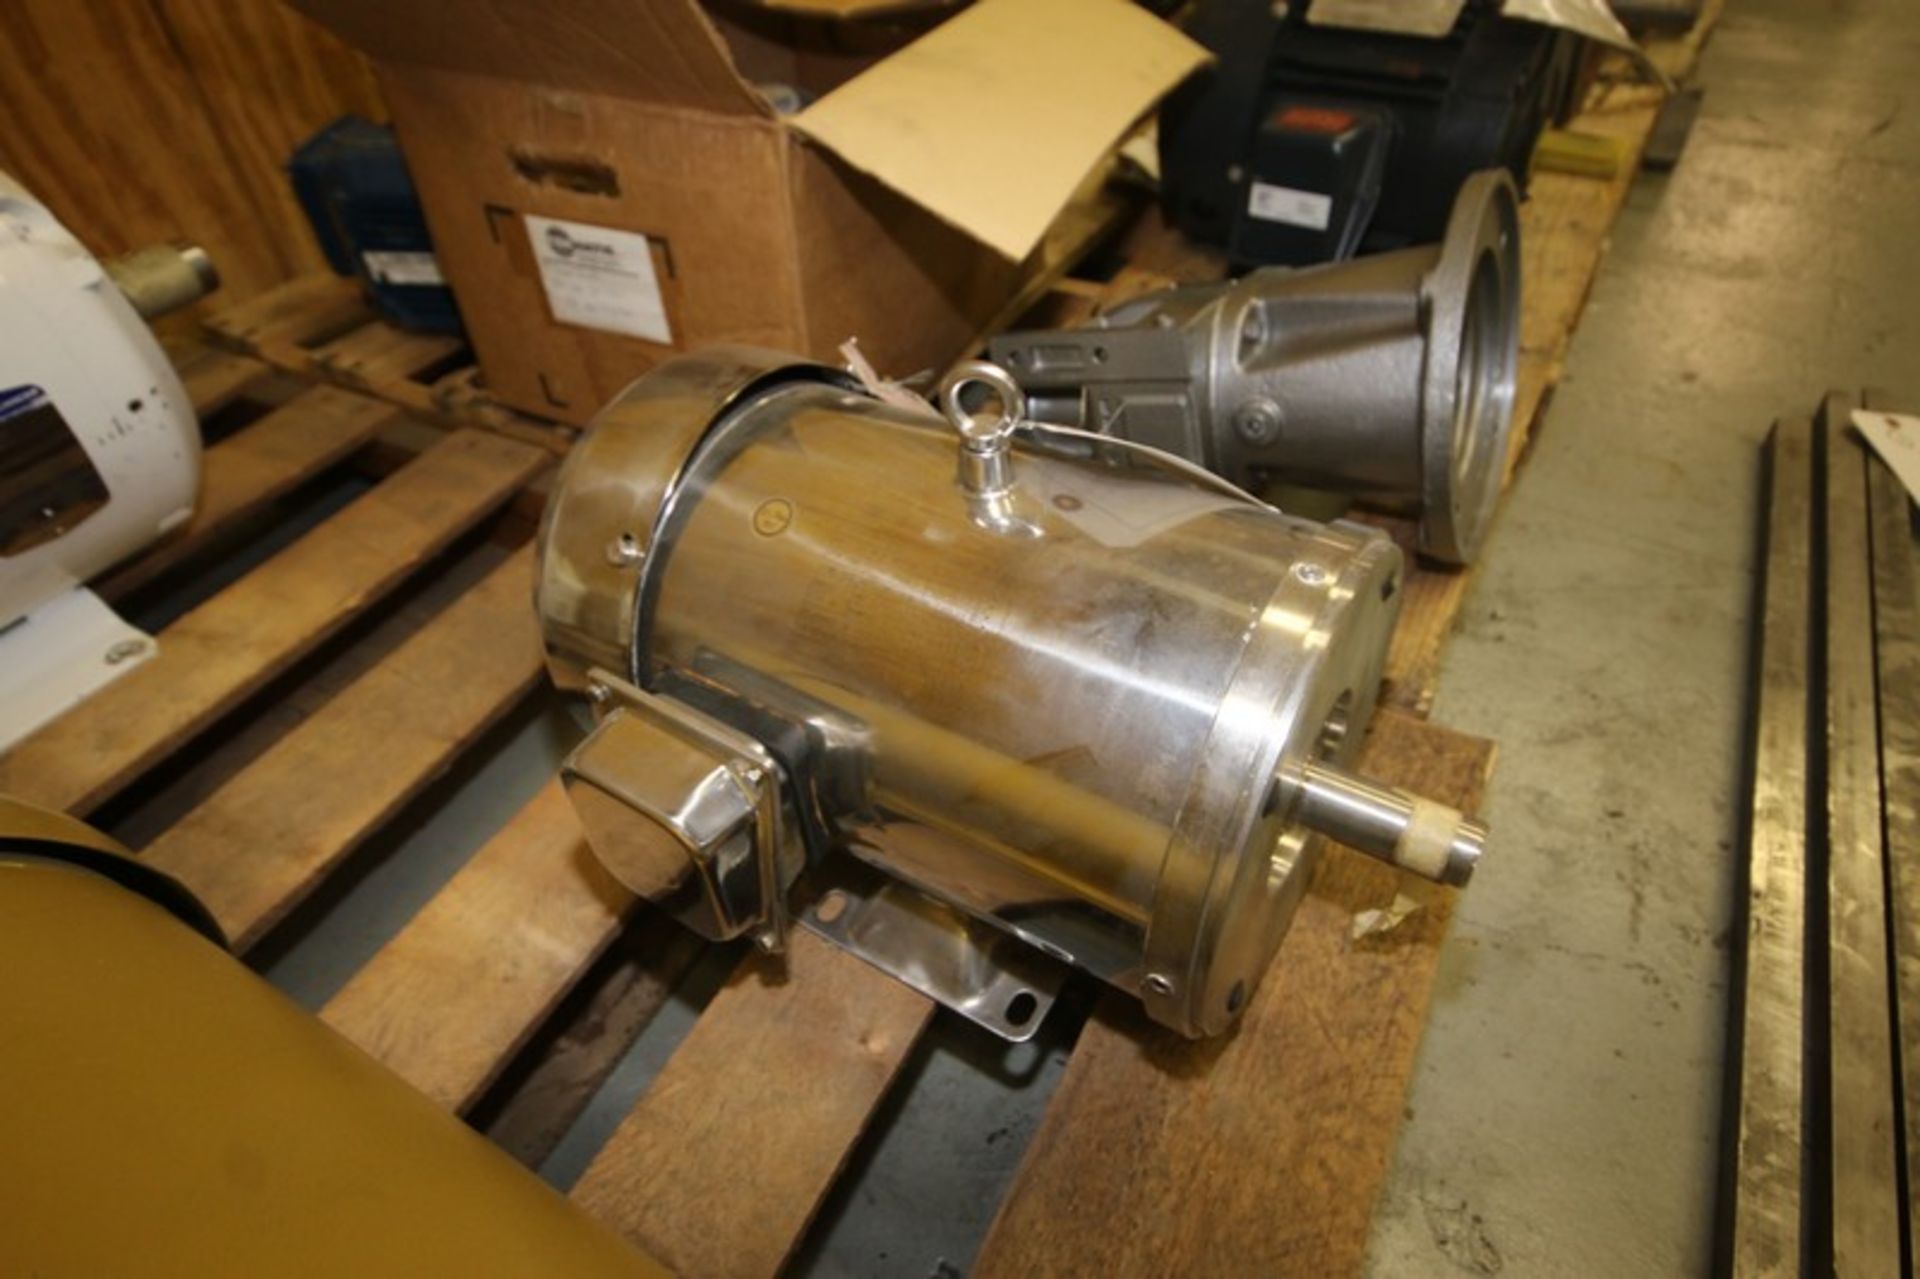 NEW Gator 3 hp S/S Clad Pump Motor,1765 RPM, Frame #182TX, 208-230/460 Volts, 3 Phase(INV#75117) (